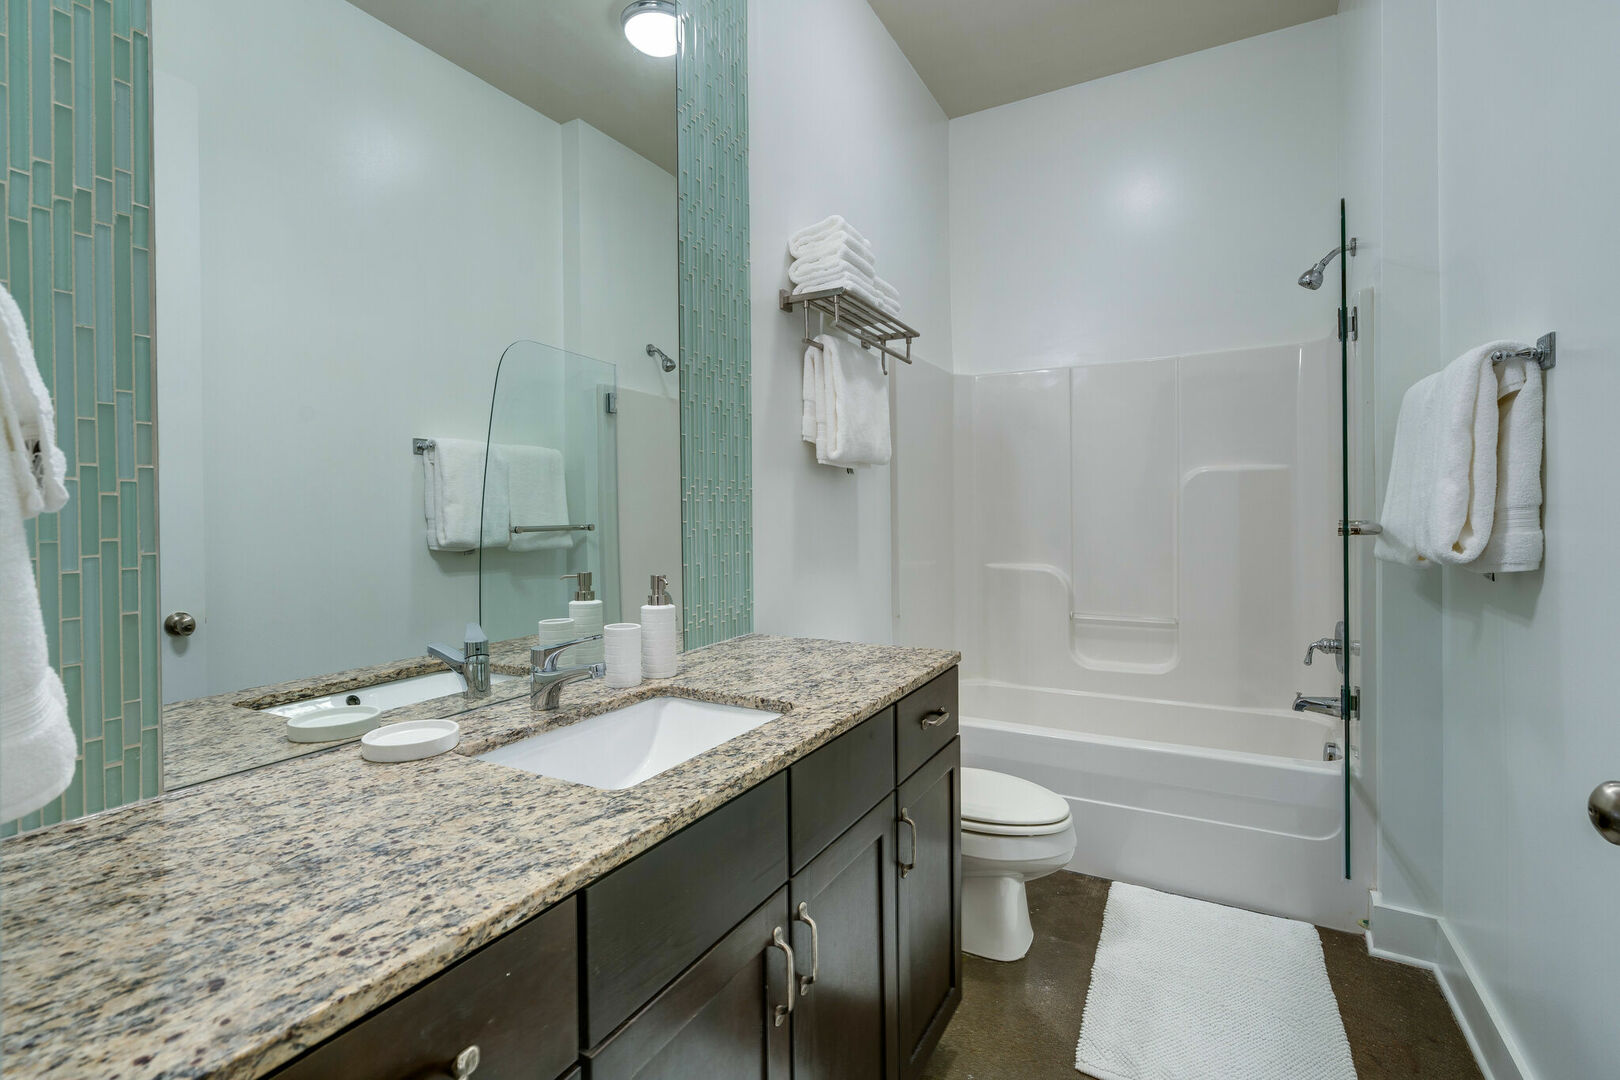 Spacious bathroom with large mirror and shower/tub combo.